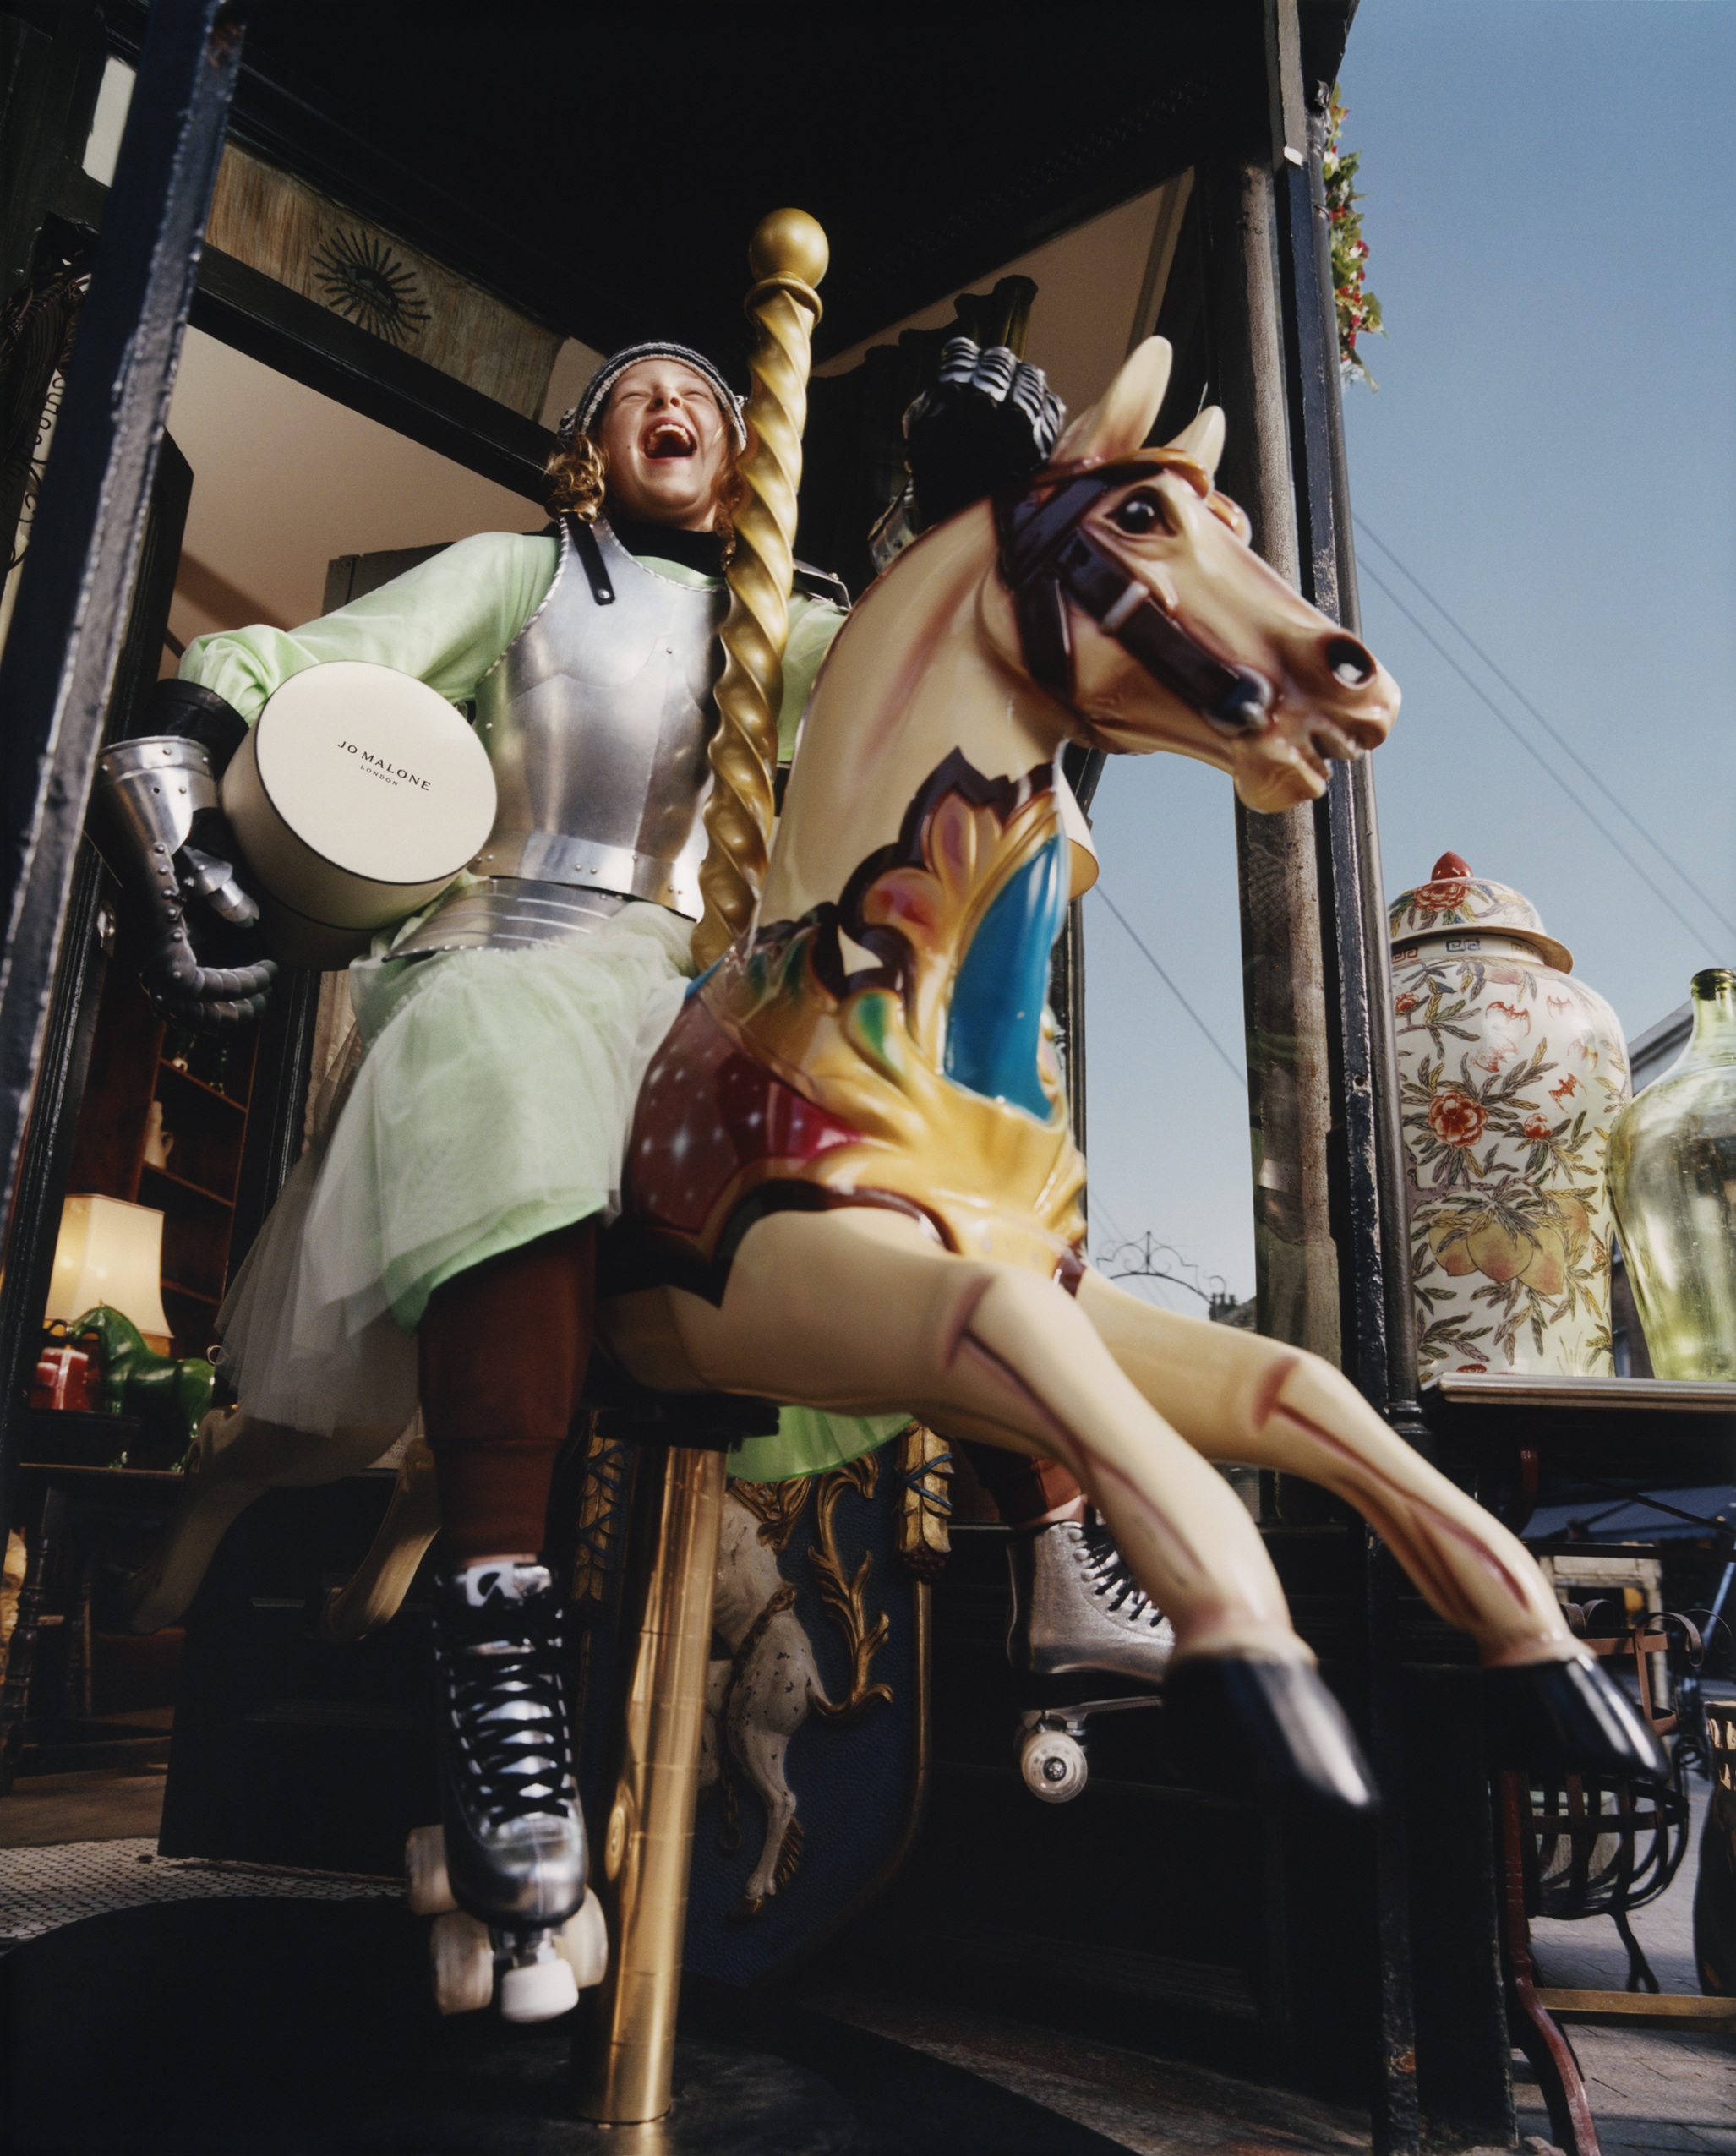 young girl with a green dress with silver rollerskates on holding a jo malone box riding a merry-go-round